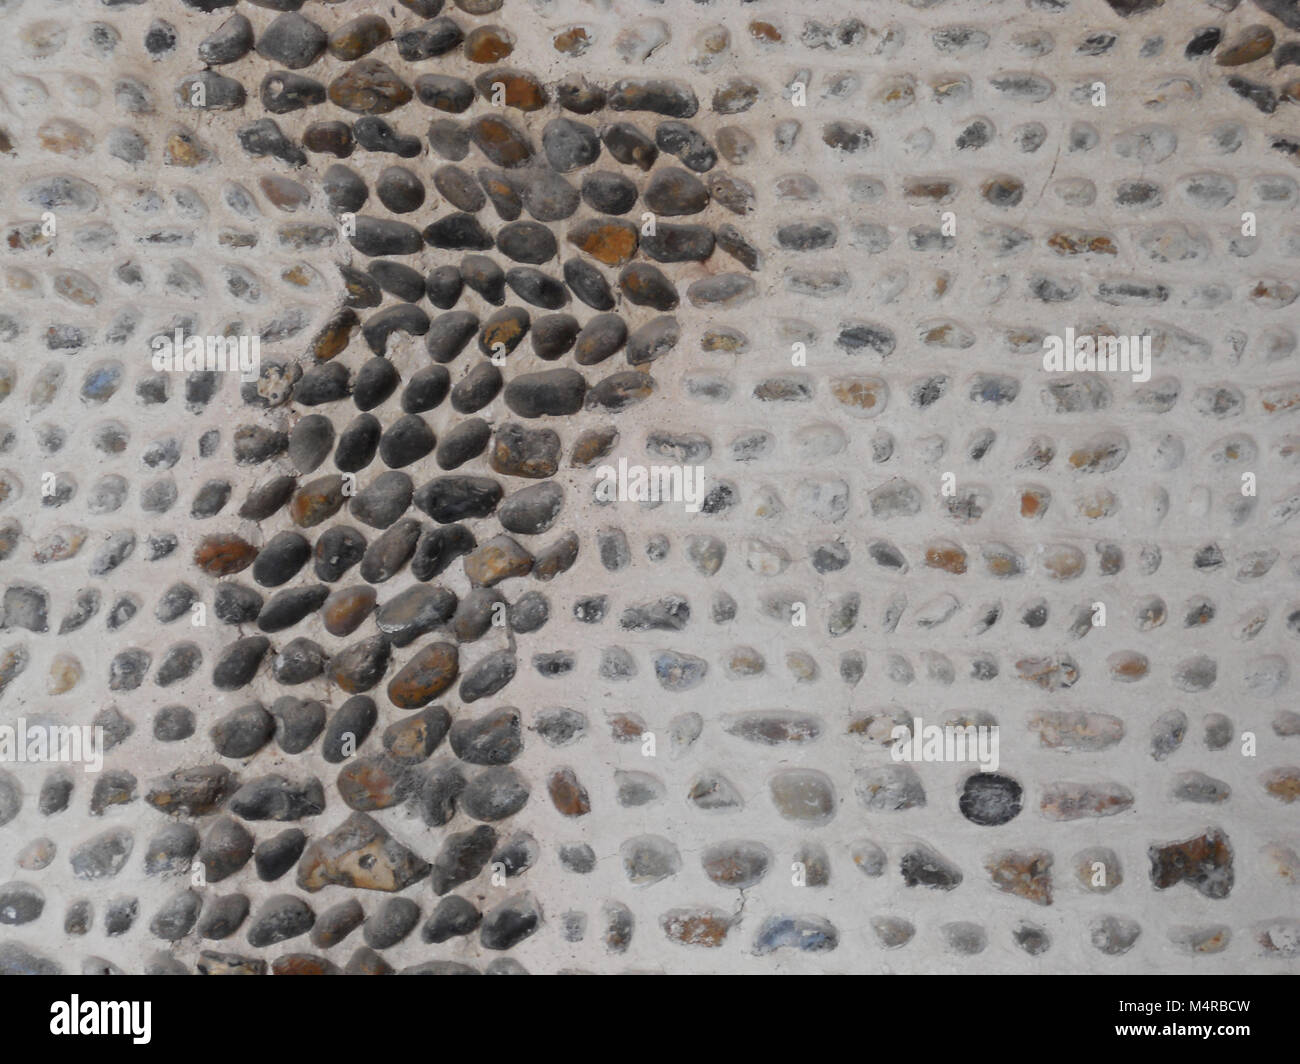 Wall of Stones Set in Mortar Stock Photo